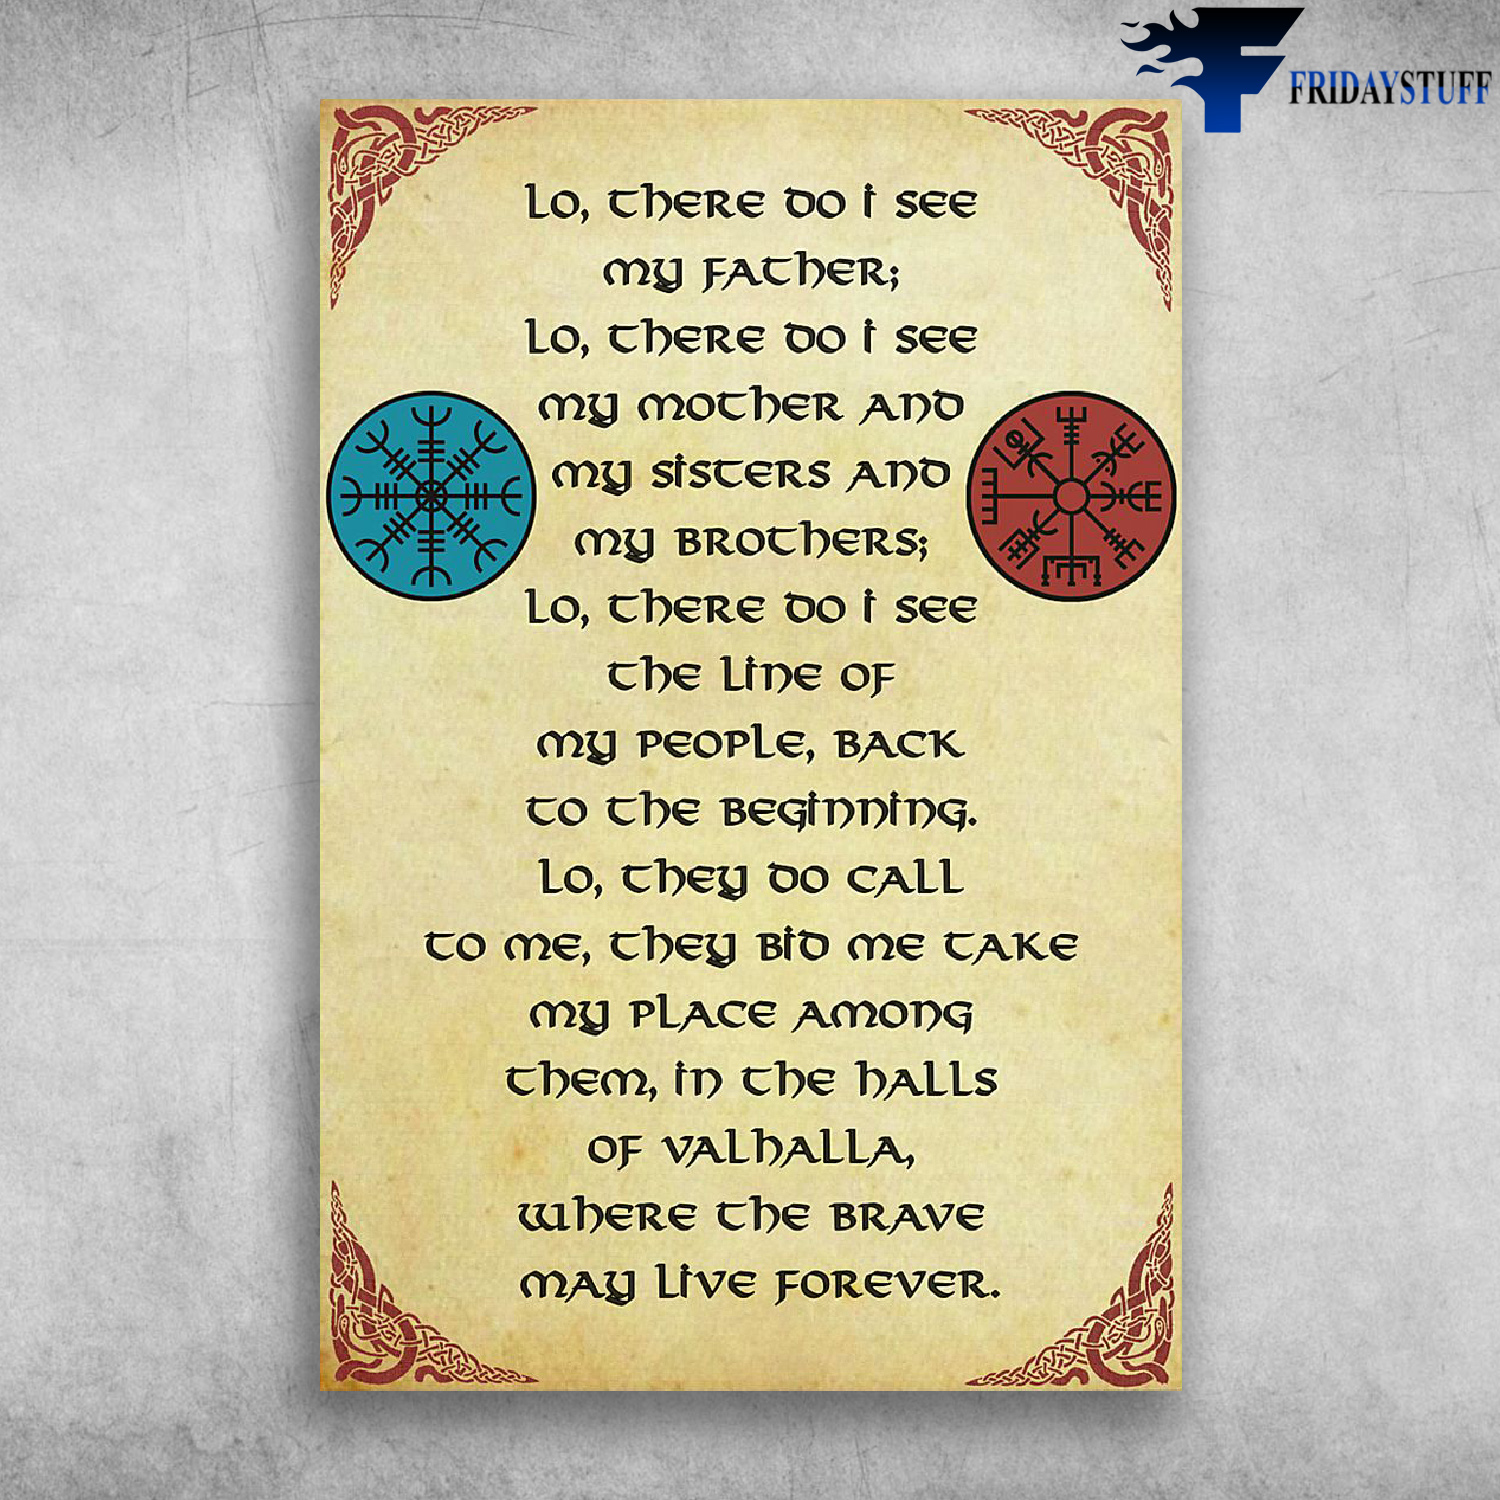 Viking Prayer - THIRTEENTH WARRIOR - Lo There Do I See My Father